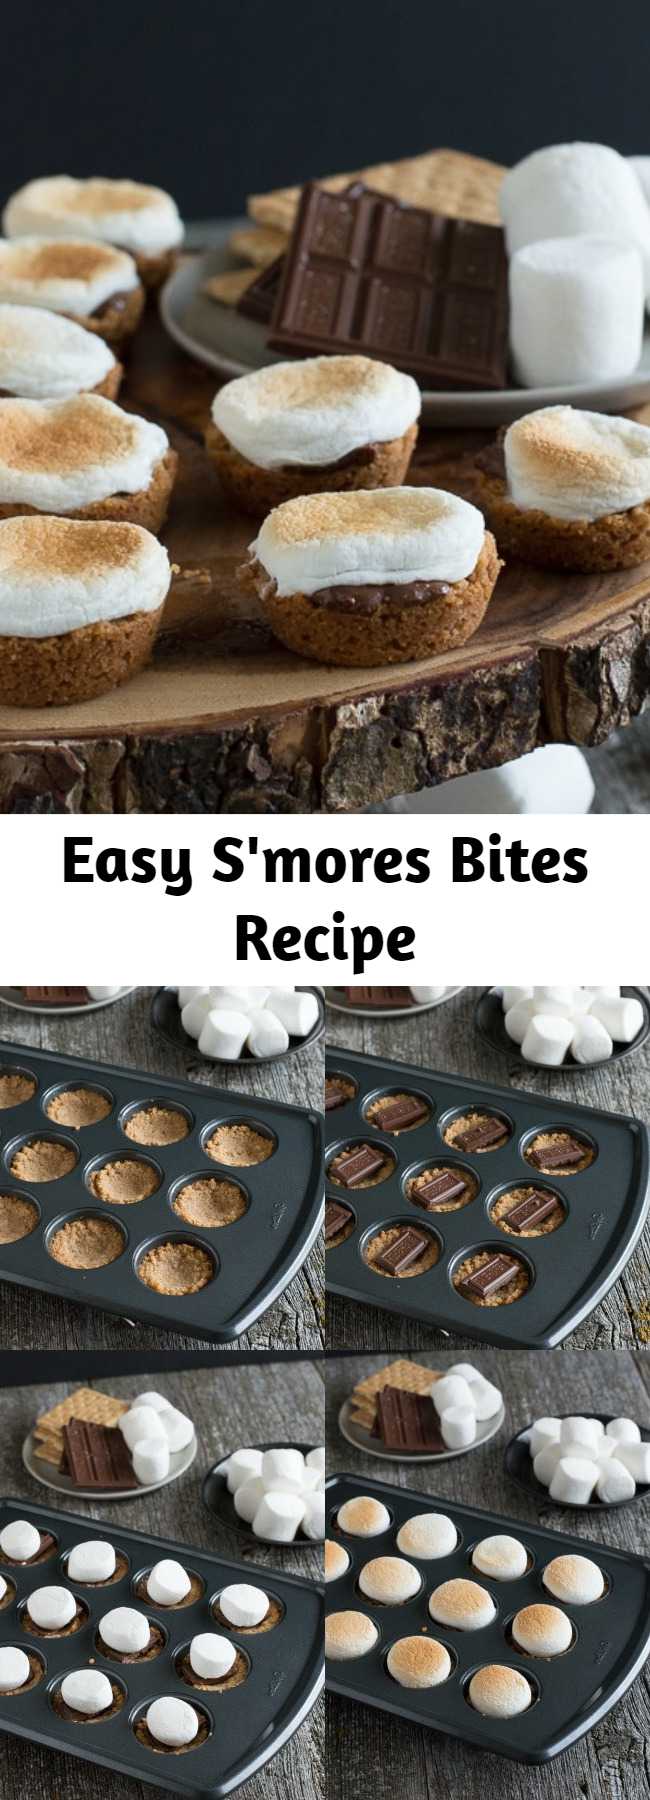 Easy S'mores Bites Recipe - An easy S'mores recipe and one of our favorite desserts to make all year round. S'mores Bites are a twist on the classic s'mores dessert, make these little S'mores Bites in the oven! #smores #smoresbites #indoorsmores #muffinpansmores